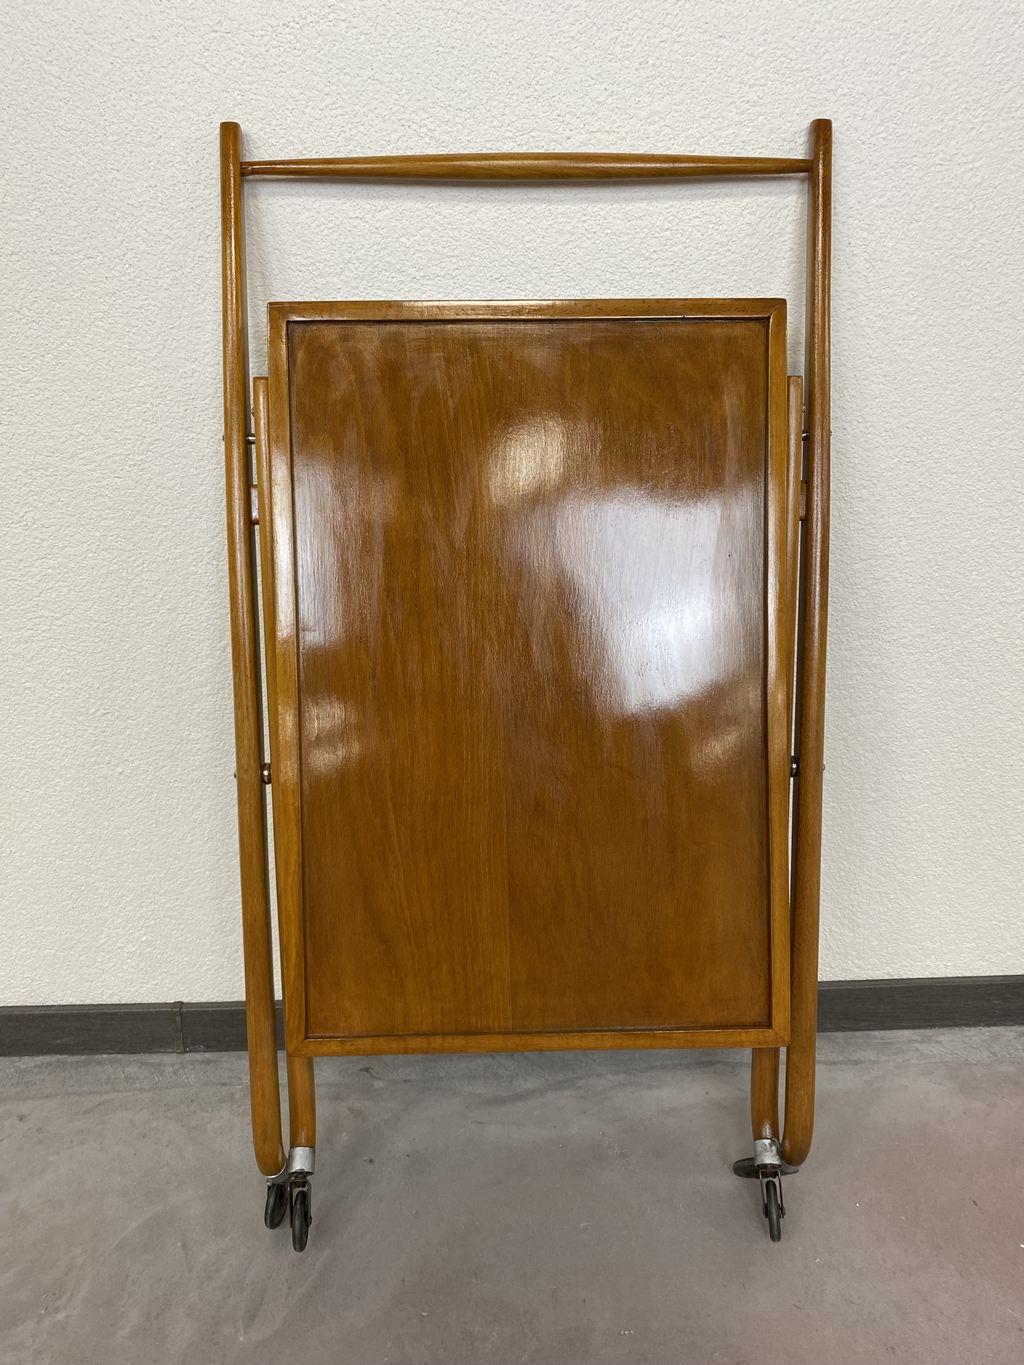 Mid-20th Century Functionalist Folding Trolley by Thonet For Sale